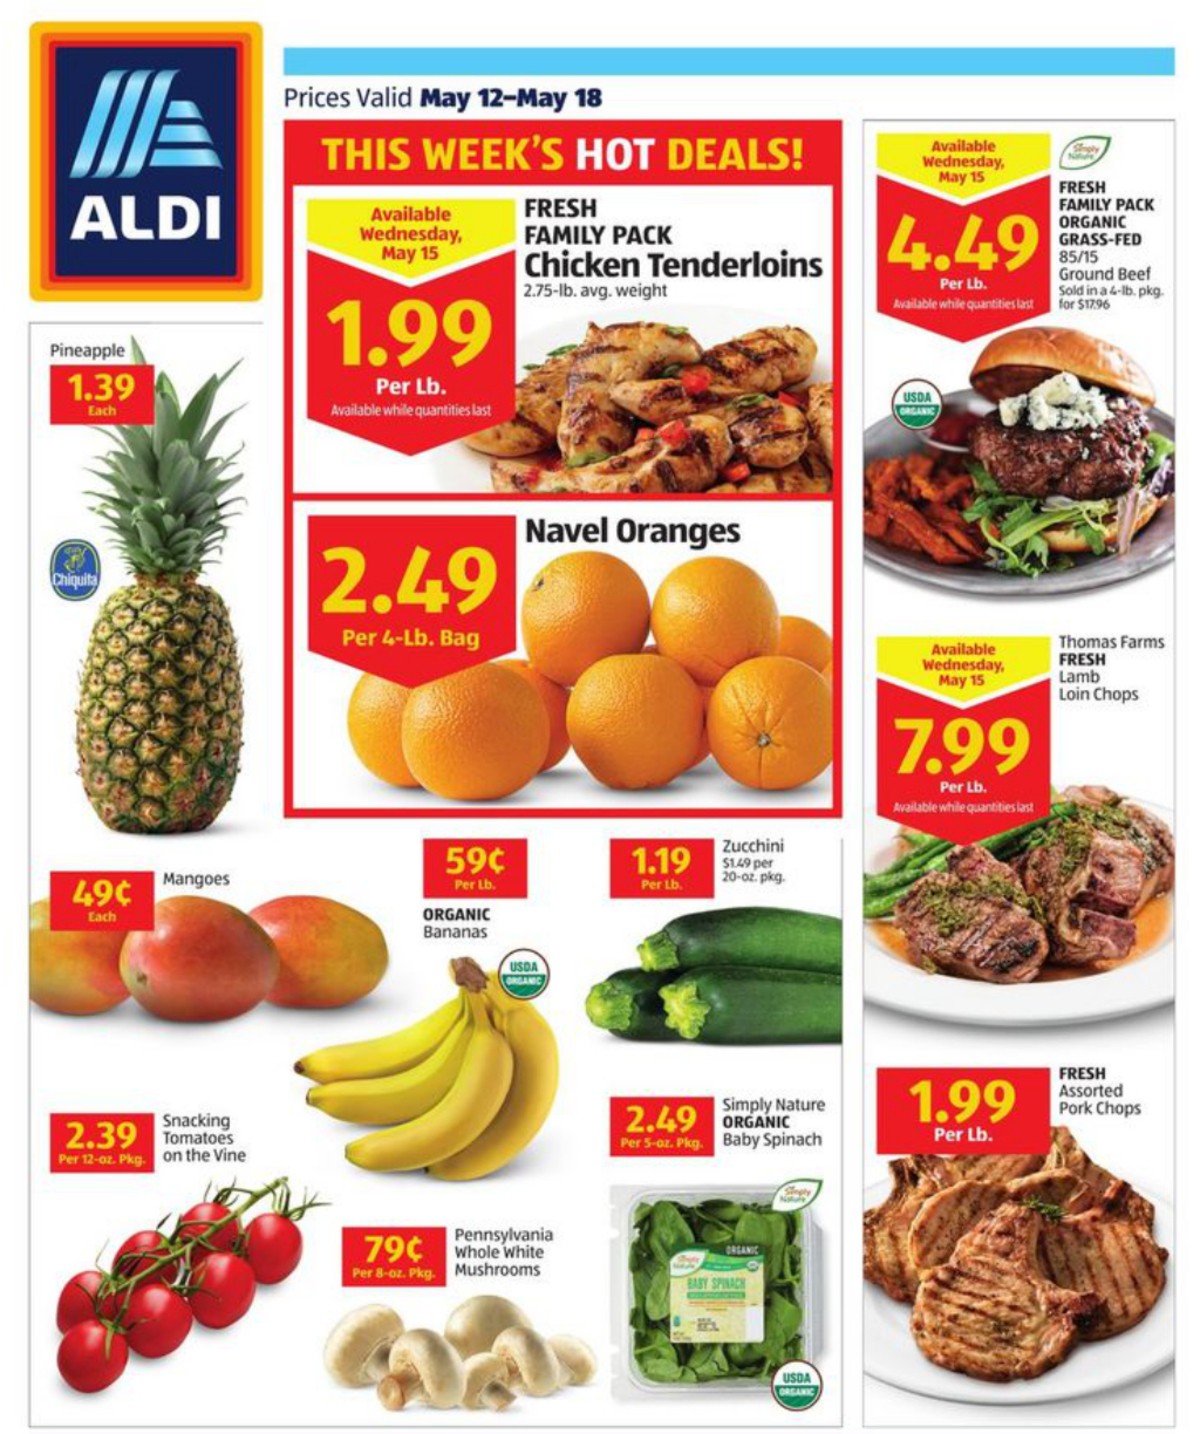 ALDI US Weekly Ads & Special Buys from May 12